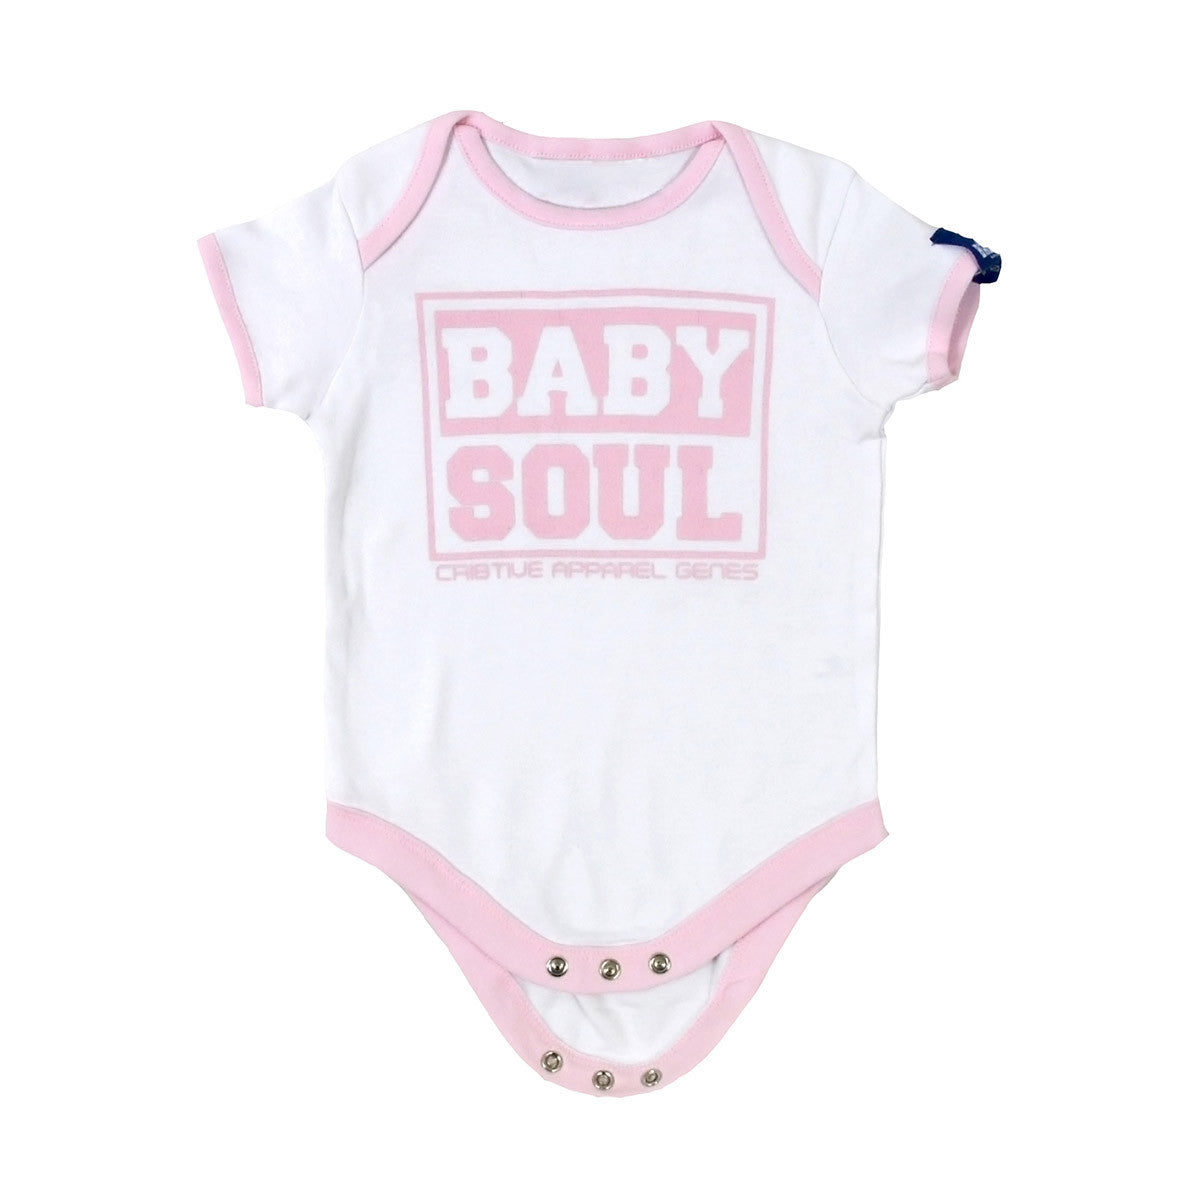 Baby Block Contrast Baby Vest (White/Pale Pink)